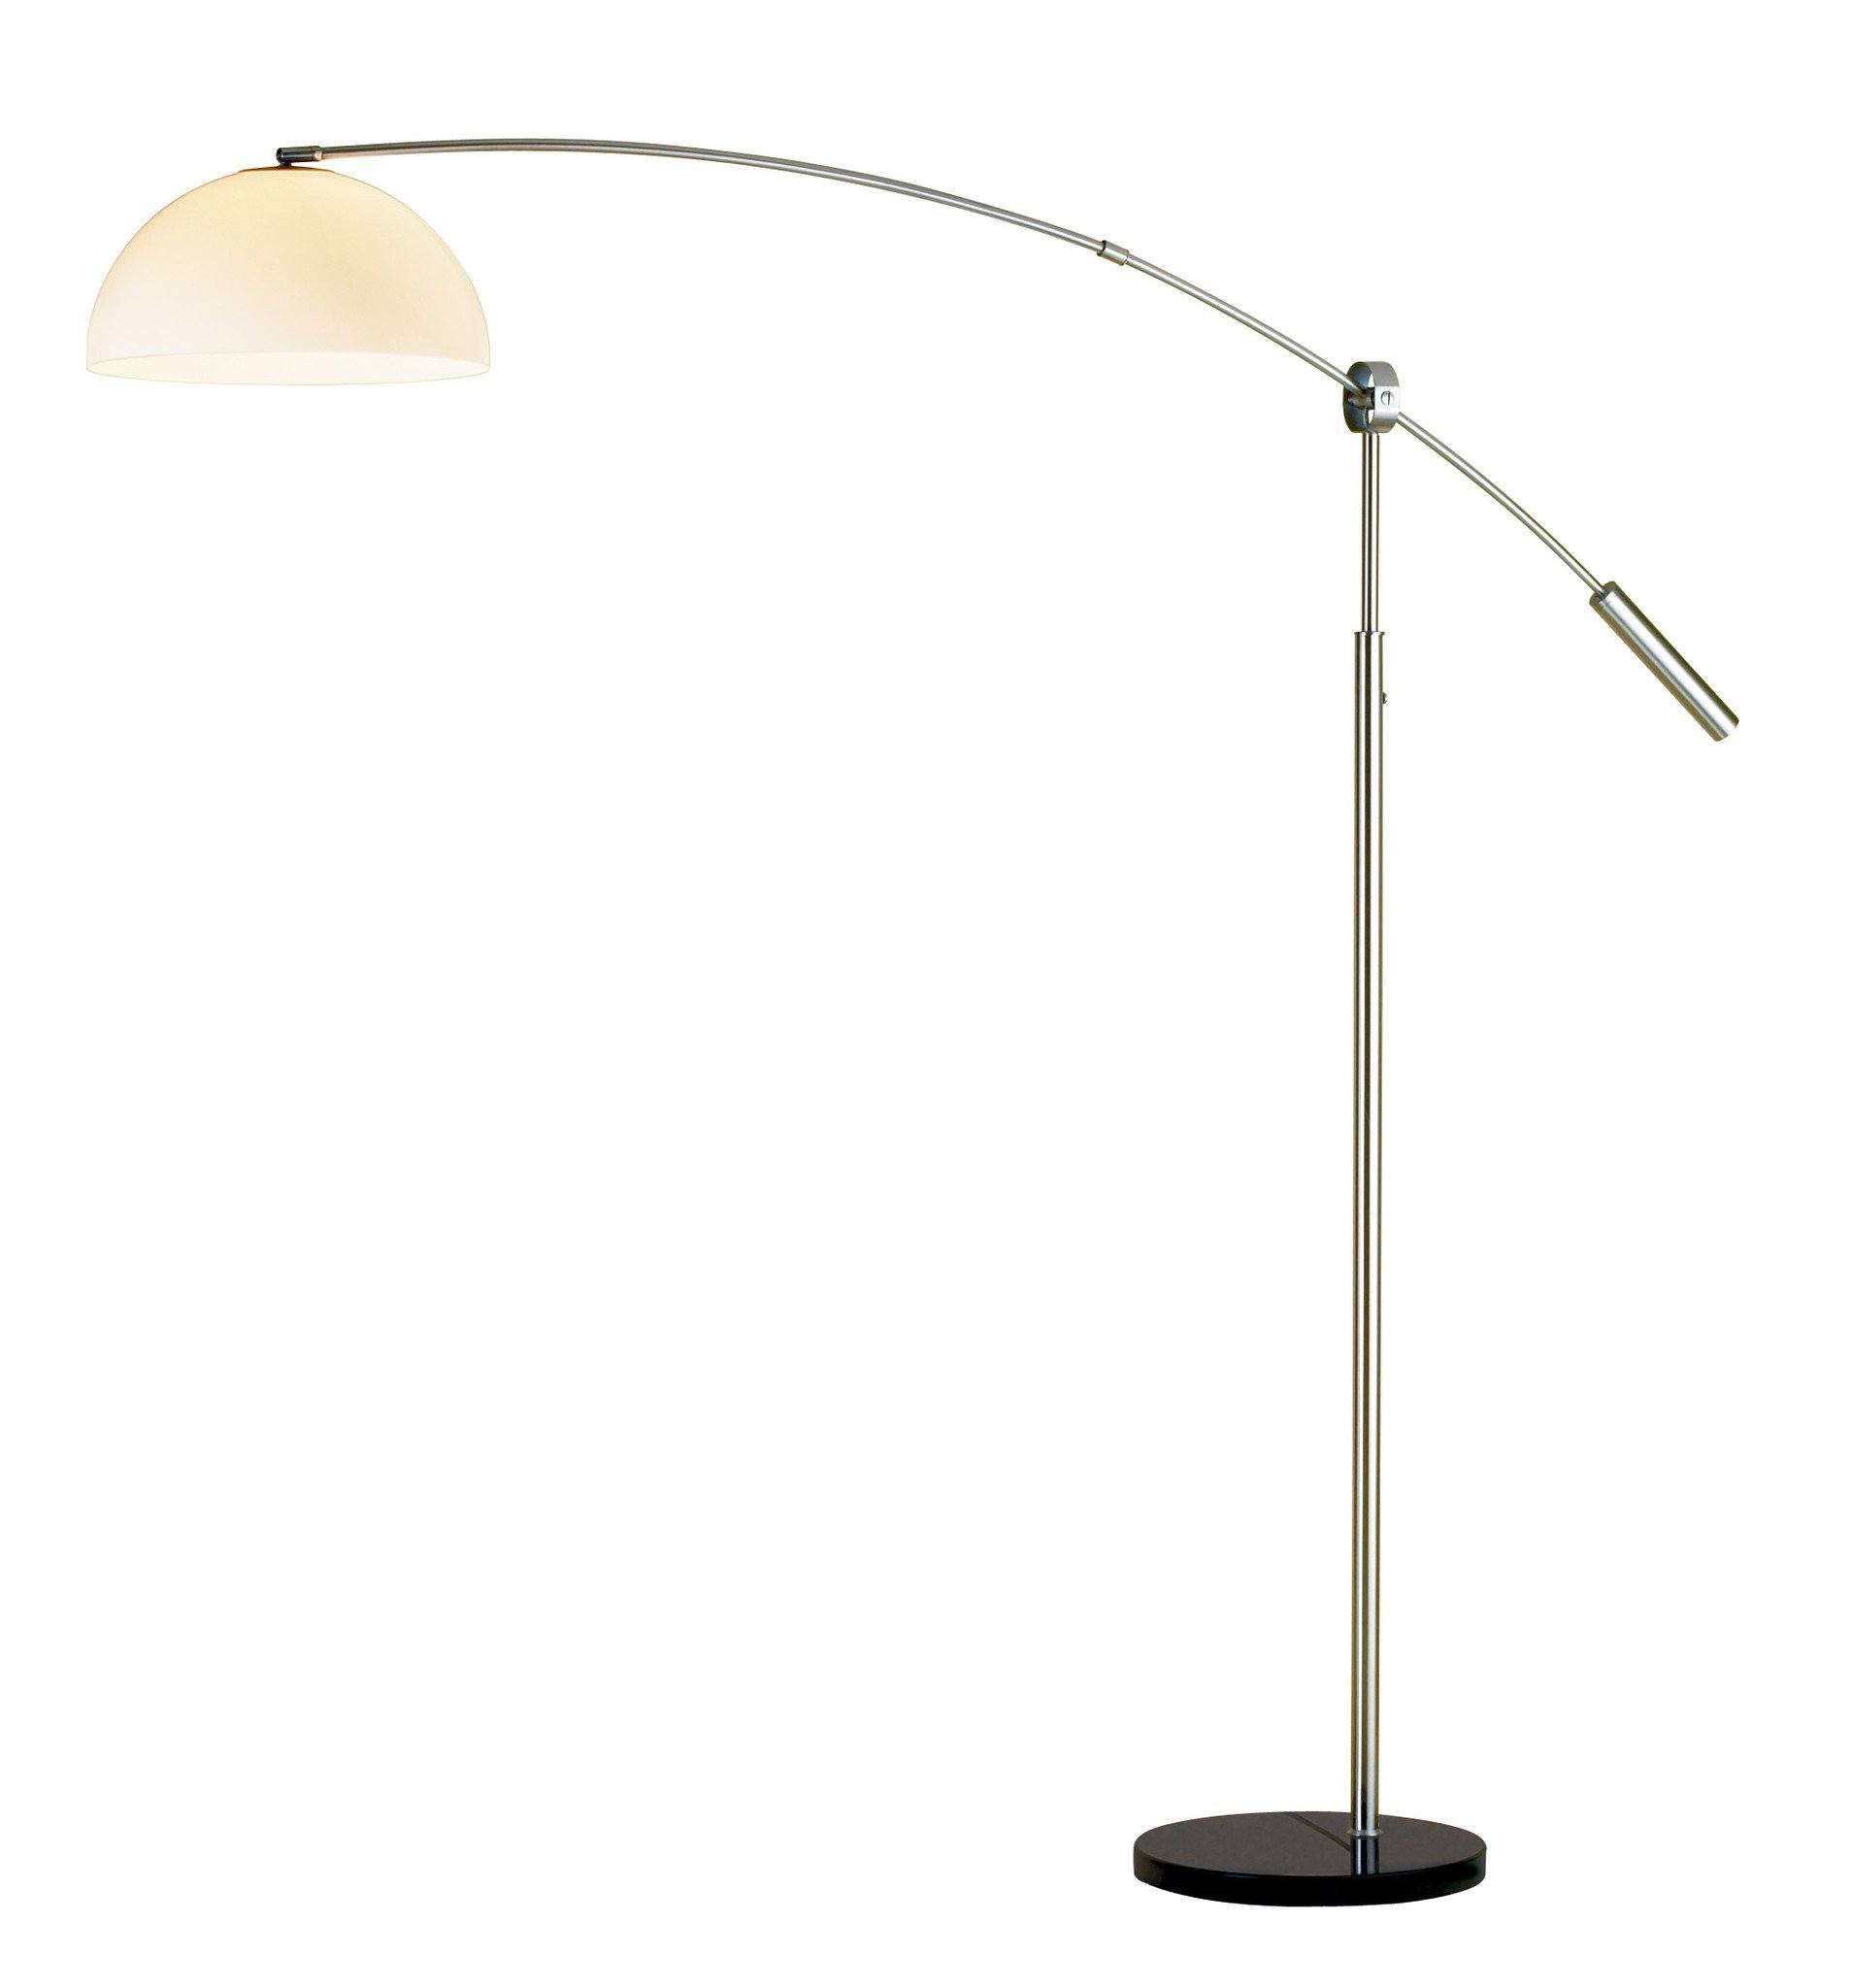 Outreach Arc Lamp Lamps Adesso 